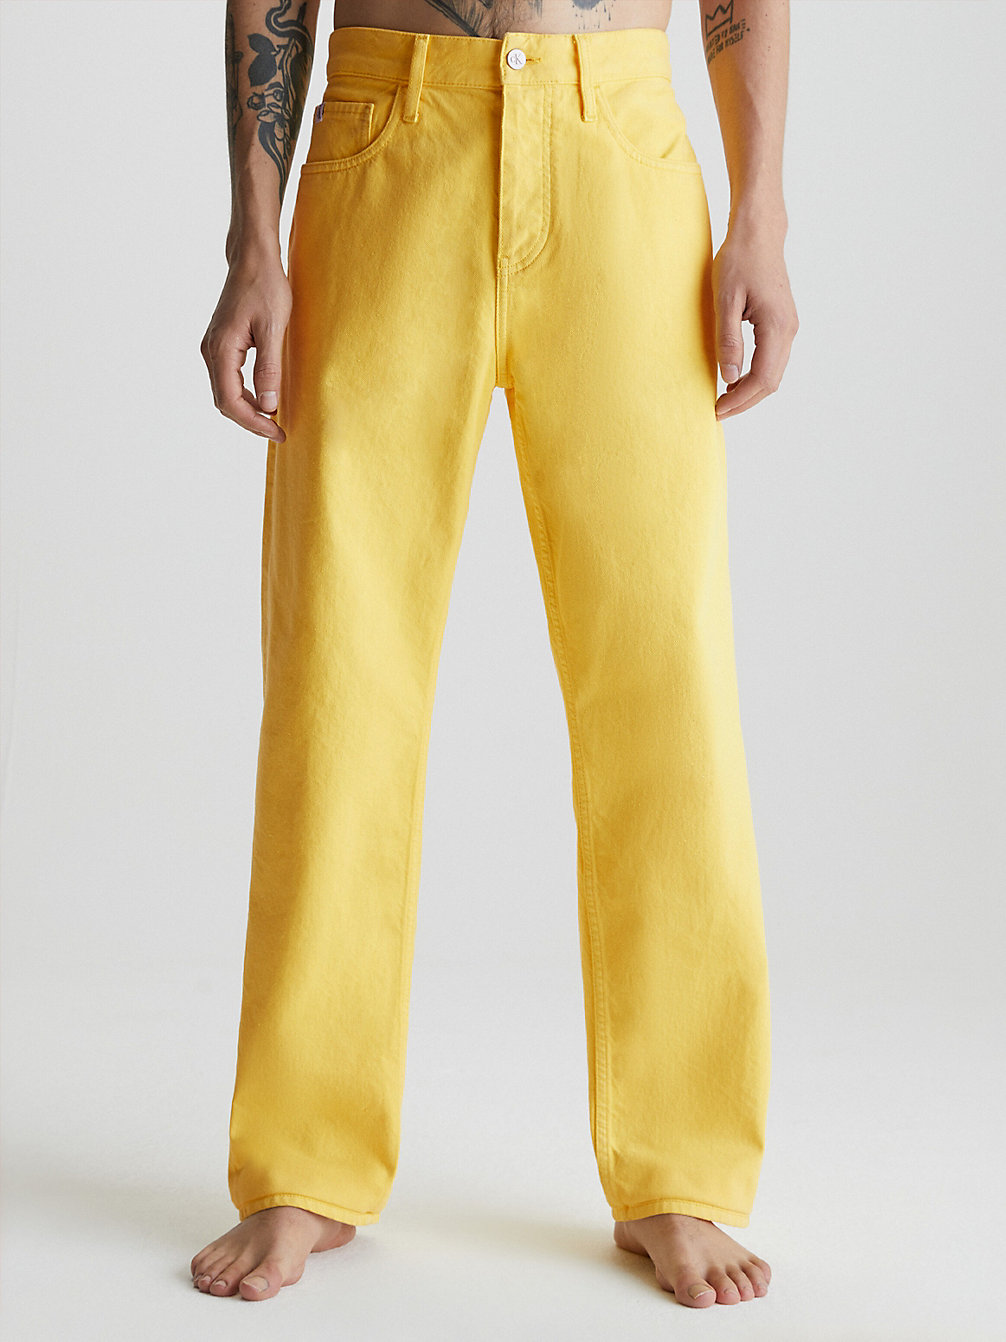 90's Straight Jeans > PRIMROSE YELLOW > undefined mujer > Calvin Klein